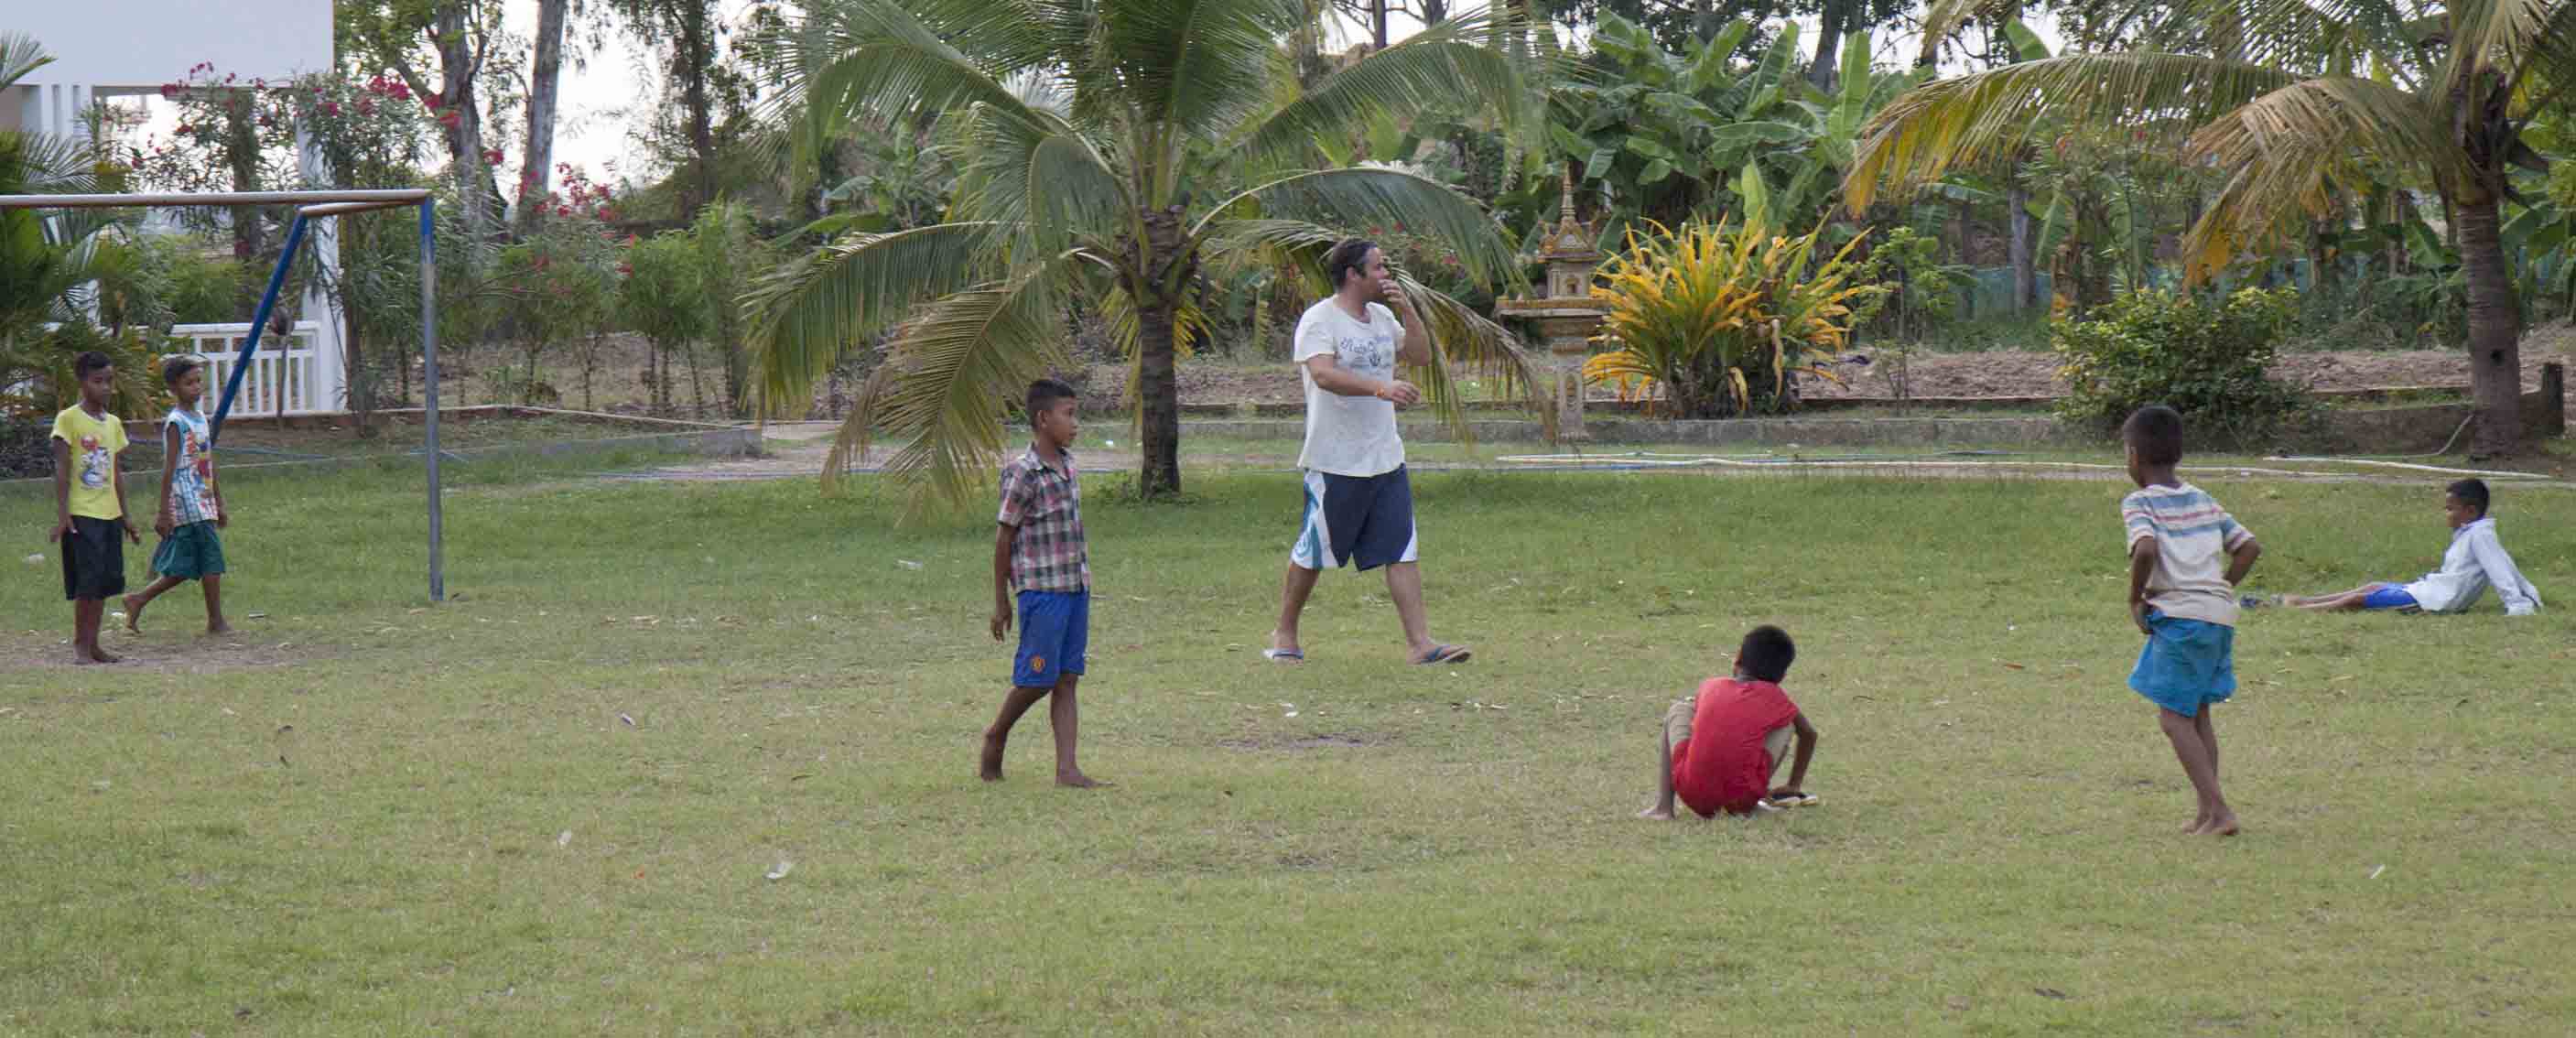 Playing football with the visitors